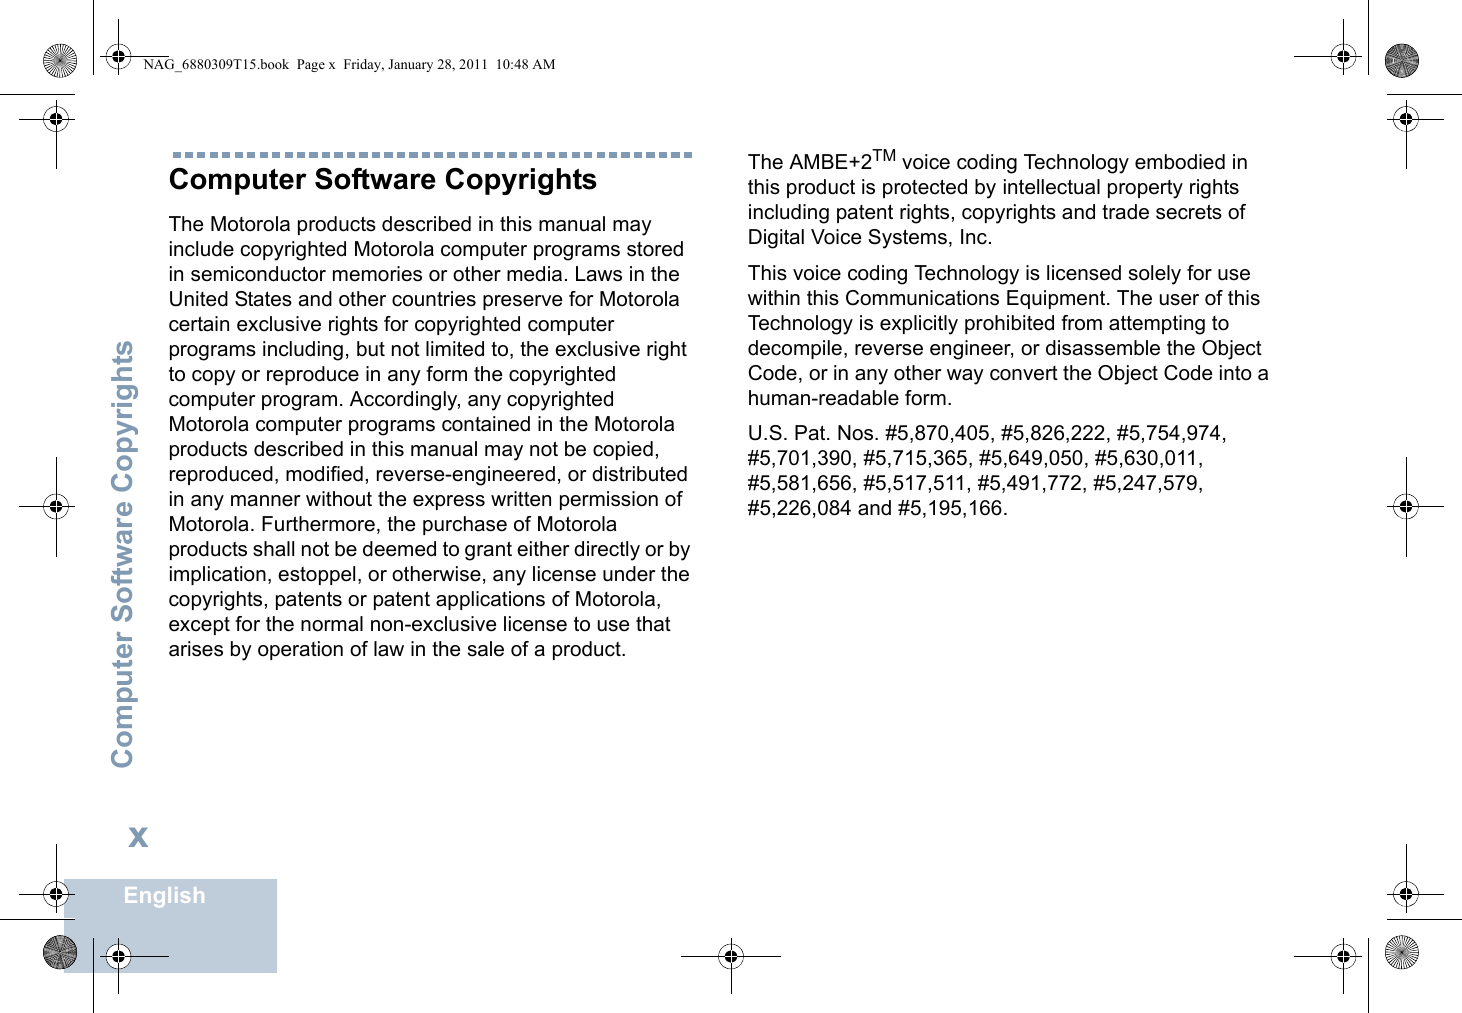 Computer Software CopyrightsEnglishxComputer Software CopyrightsThe Motorola products described in this manual may include copyrighted Motorola computer programs stored in semiconductor memories or other media. Laws in the United States and other countries preserve for Motorola certain exclusive rights for copyrighted computer programs including, but not limited to, the exclusive right to copy or reproduce in any form the copyrighted computer program. Accordingly, any copyrighted Motorola computer programs contained in the Motorola products described in this manual may not be copied, reproduced, modified, reverse-engineered, or distributed in any manner without the express written permission of Motorola. Furthermore, the purchase of Motorola products shall not be deemed to grant either directly or by implication, estoppel, or otherwise, any license under the copyrights, patents or patent applications of Motorola, except for the normal non-exclusive license to use that arises by operation of law in the sale of a product.The AMBE+2TM voice coding Technology embodied in this product is protected by intellectual property rights including patent rights, copyrights and trade secrets of Digital Voice Systems, Inc. This voice coding Technology is licensed solely for use within this Communications Equipment. The user of this Technology is explicitly prohibited from attempting to decompile, reverse engineer, or disassemble the Object Code, or in any other way convert the Object Code into a human-readable form. U.S. Pat. Nos. #5,870,405, #5,826,222, #5,754,974, #5,701,390, #5,715,365, #5,649,050, #5,630,011, #5,581,656, #5,517,511, #5,491,772, #5,247,579, #5,226,084 and #5,195,166.NAG_6880309T15.book  Page x  Friday, January 28, 2011  10:48 AM